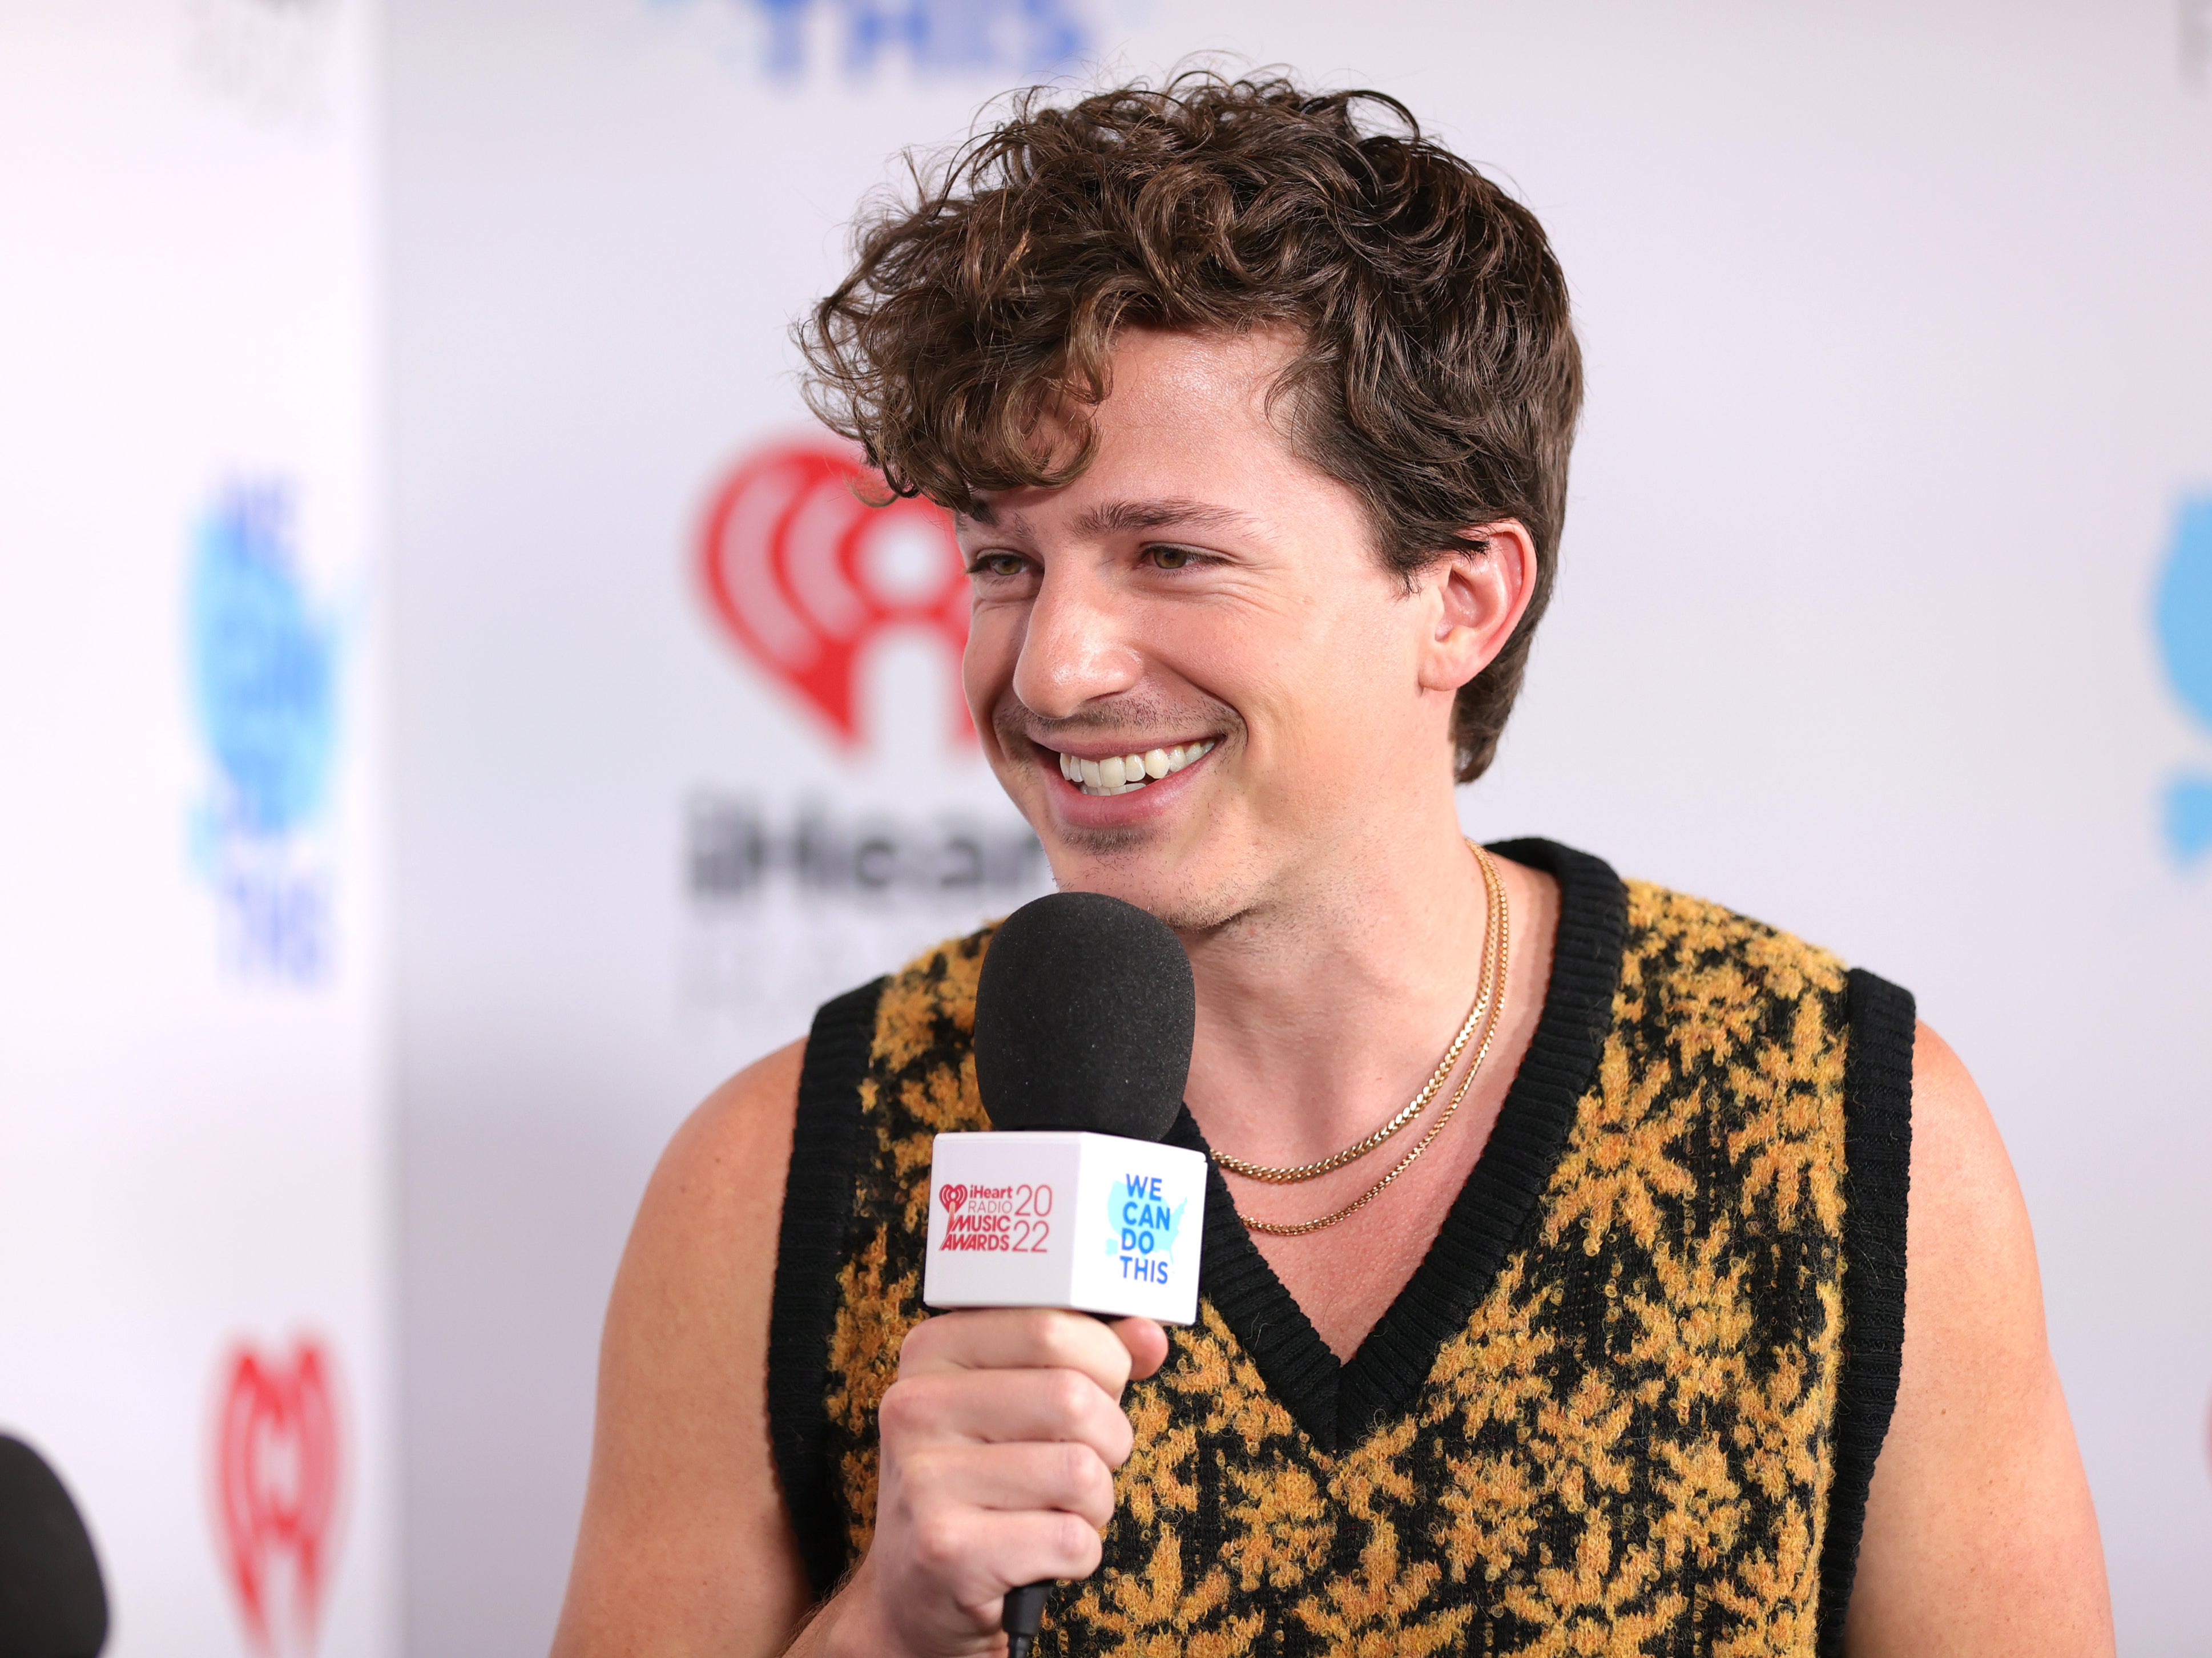 Charlie Puth at the iHeartRadio Awards in March 2022